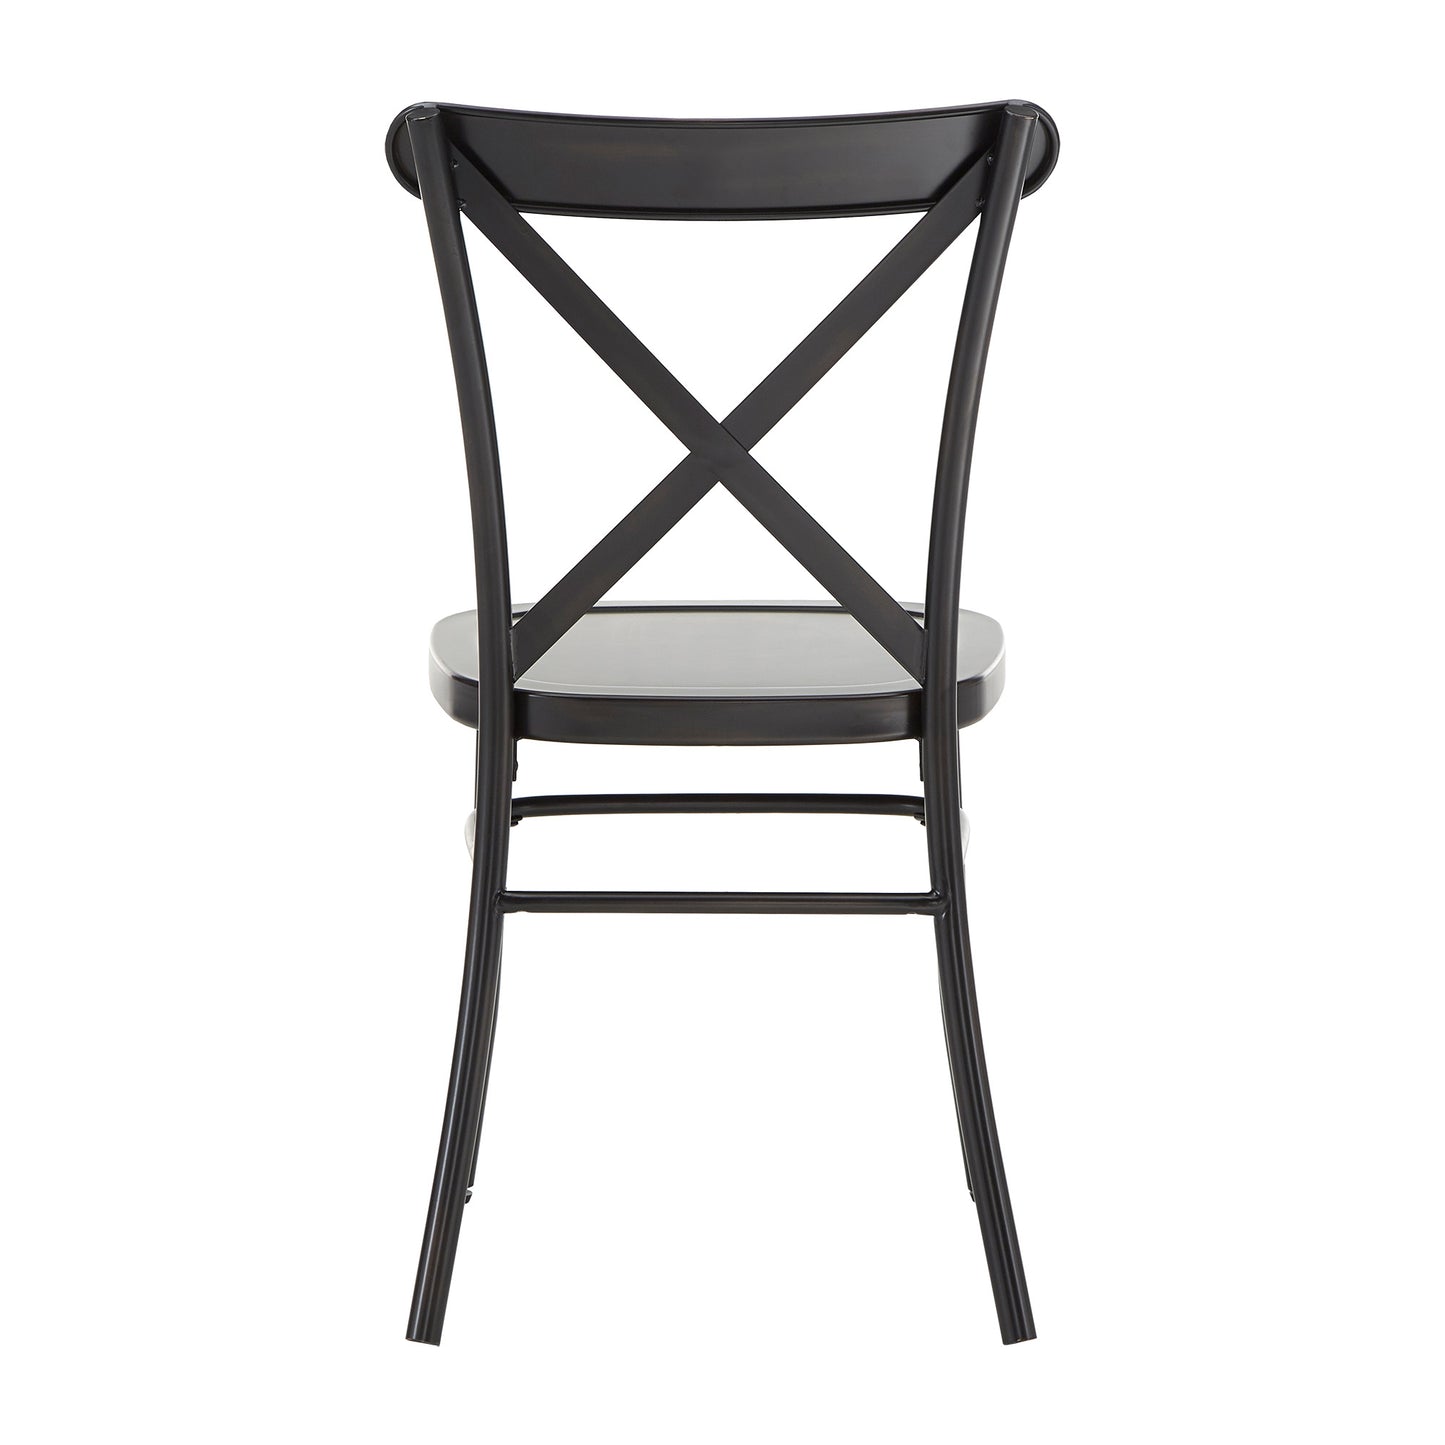 Metal Dining Chairs (Set of 2) - Antique Black Finish